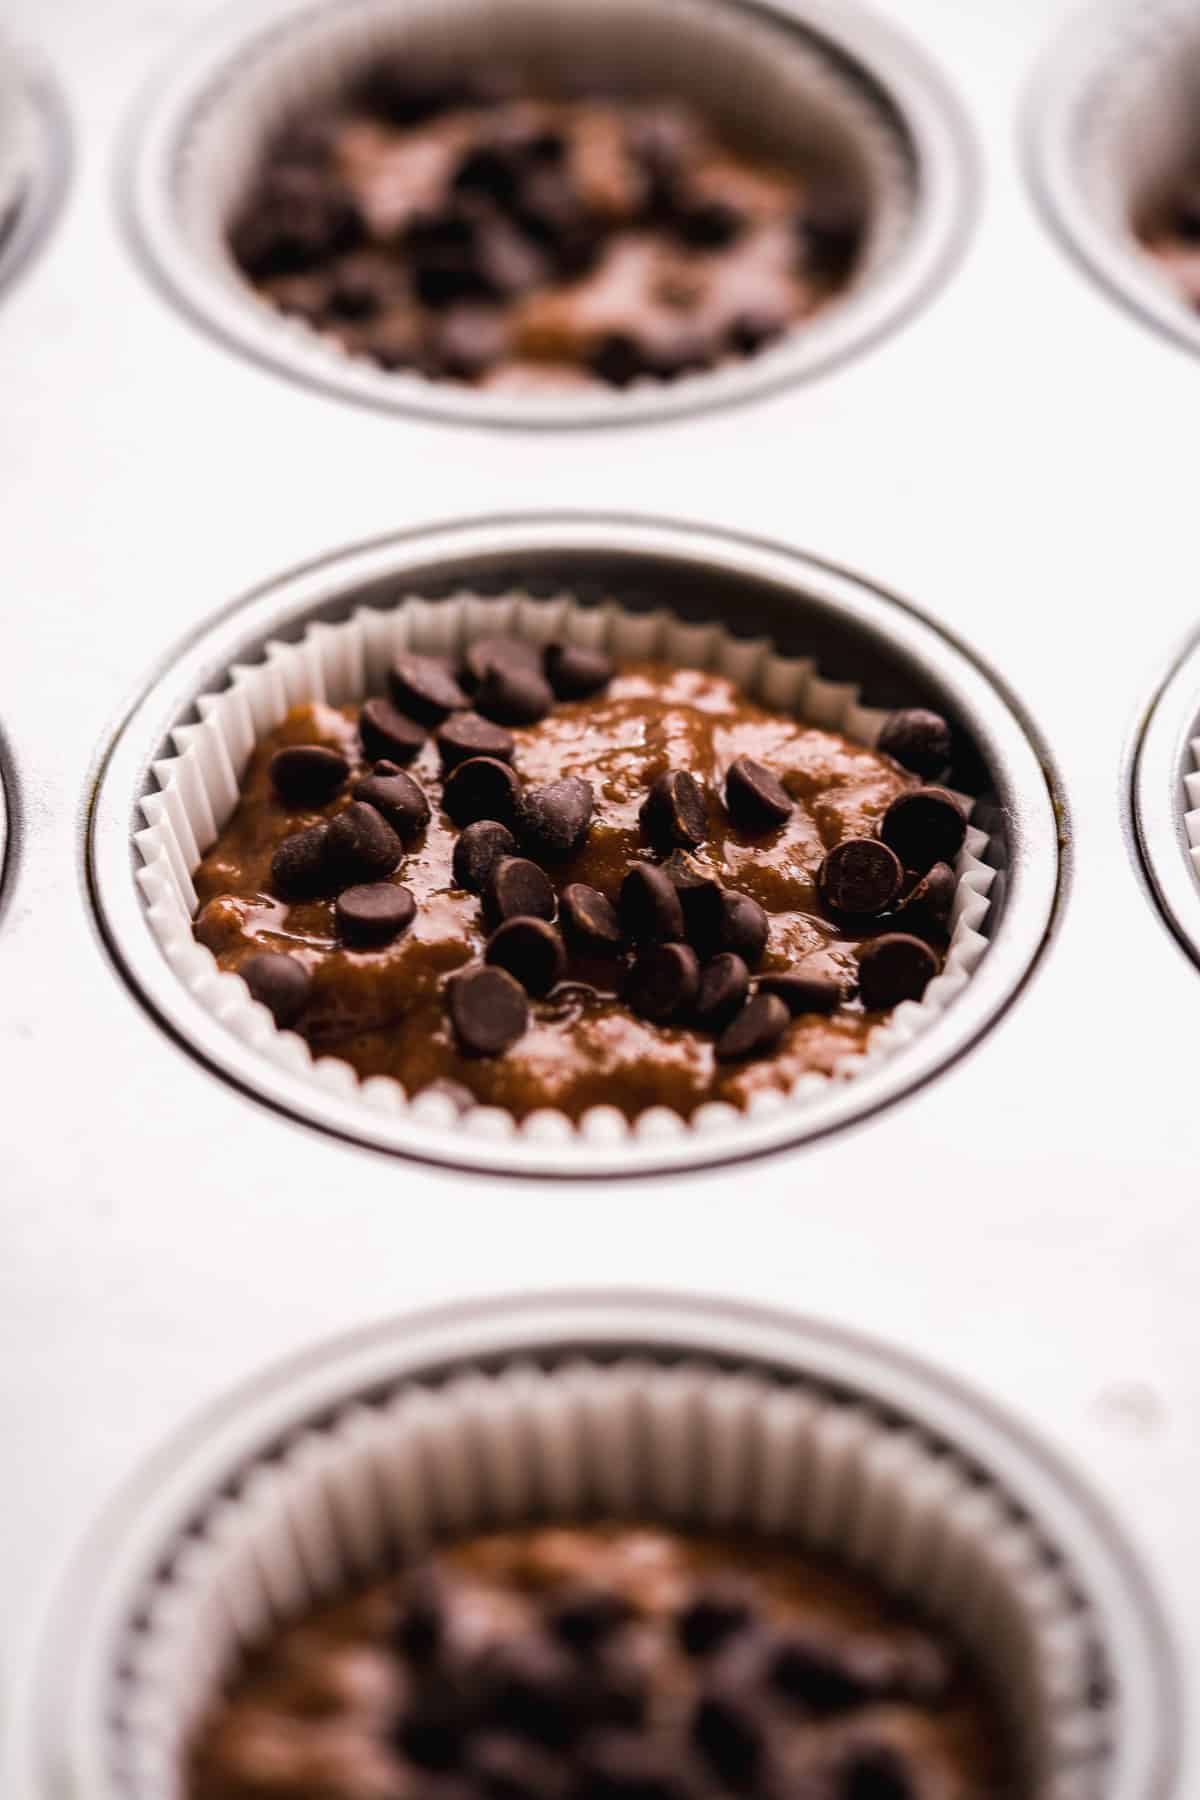 Muffin pan with a liners filled with chocolate muffin batter and chocolate chips.